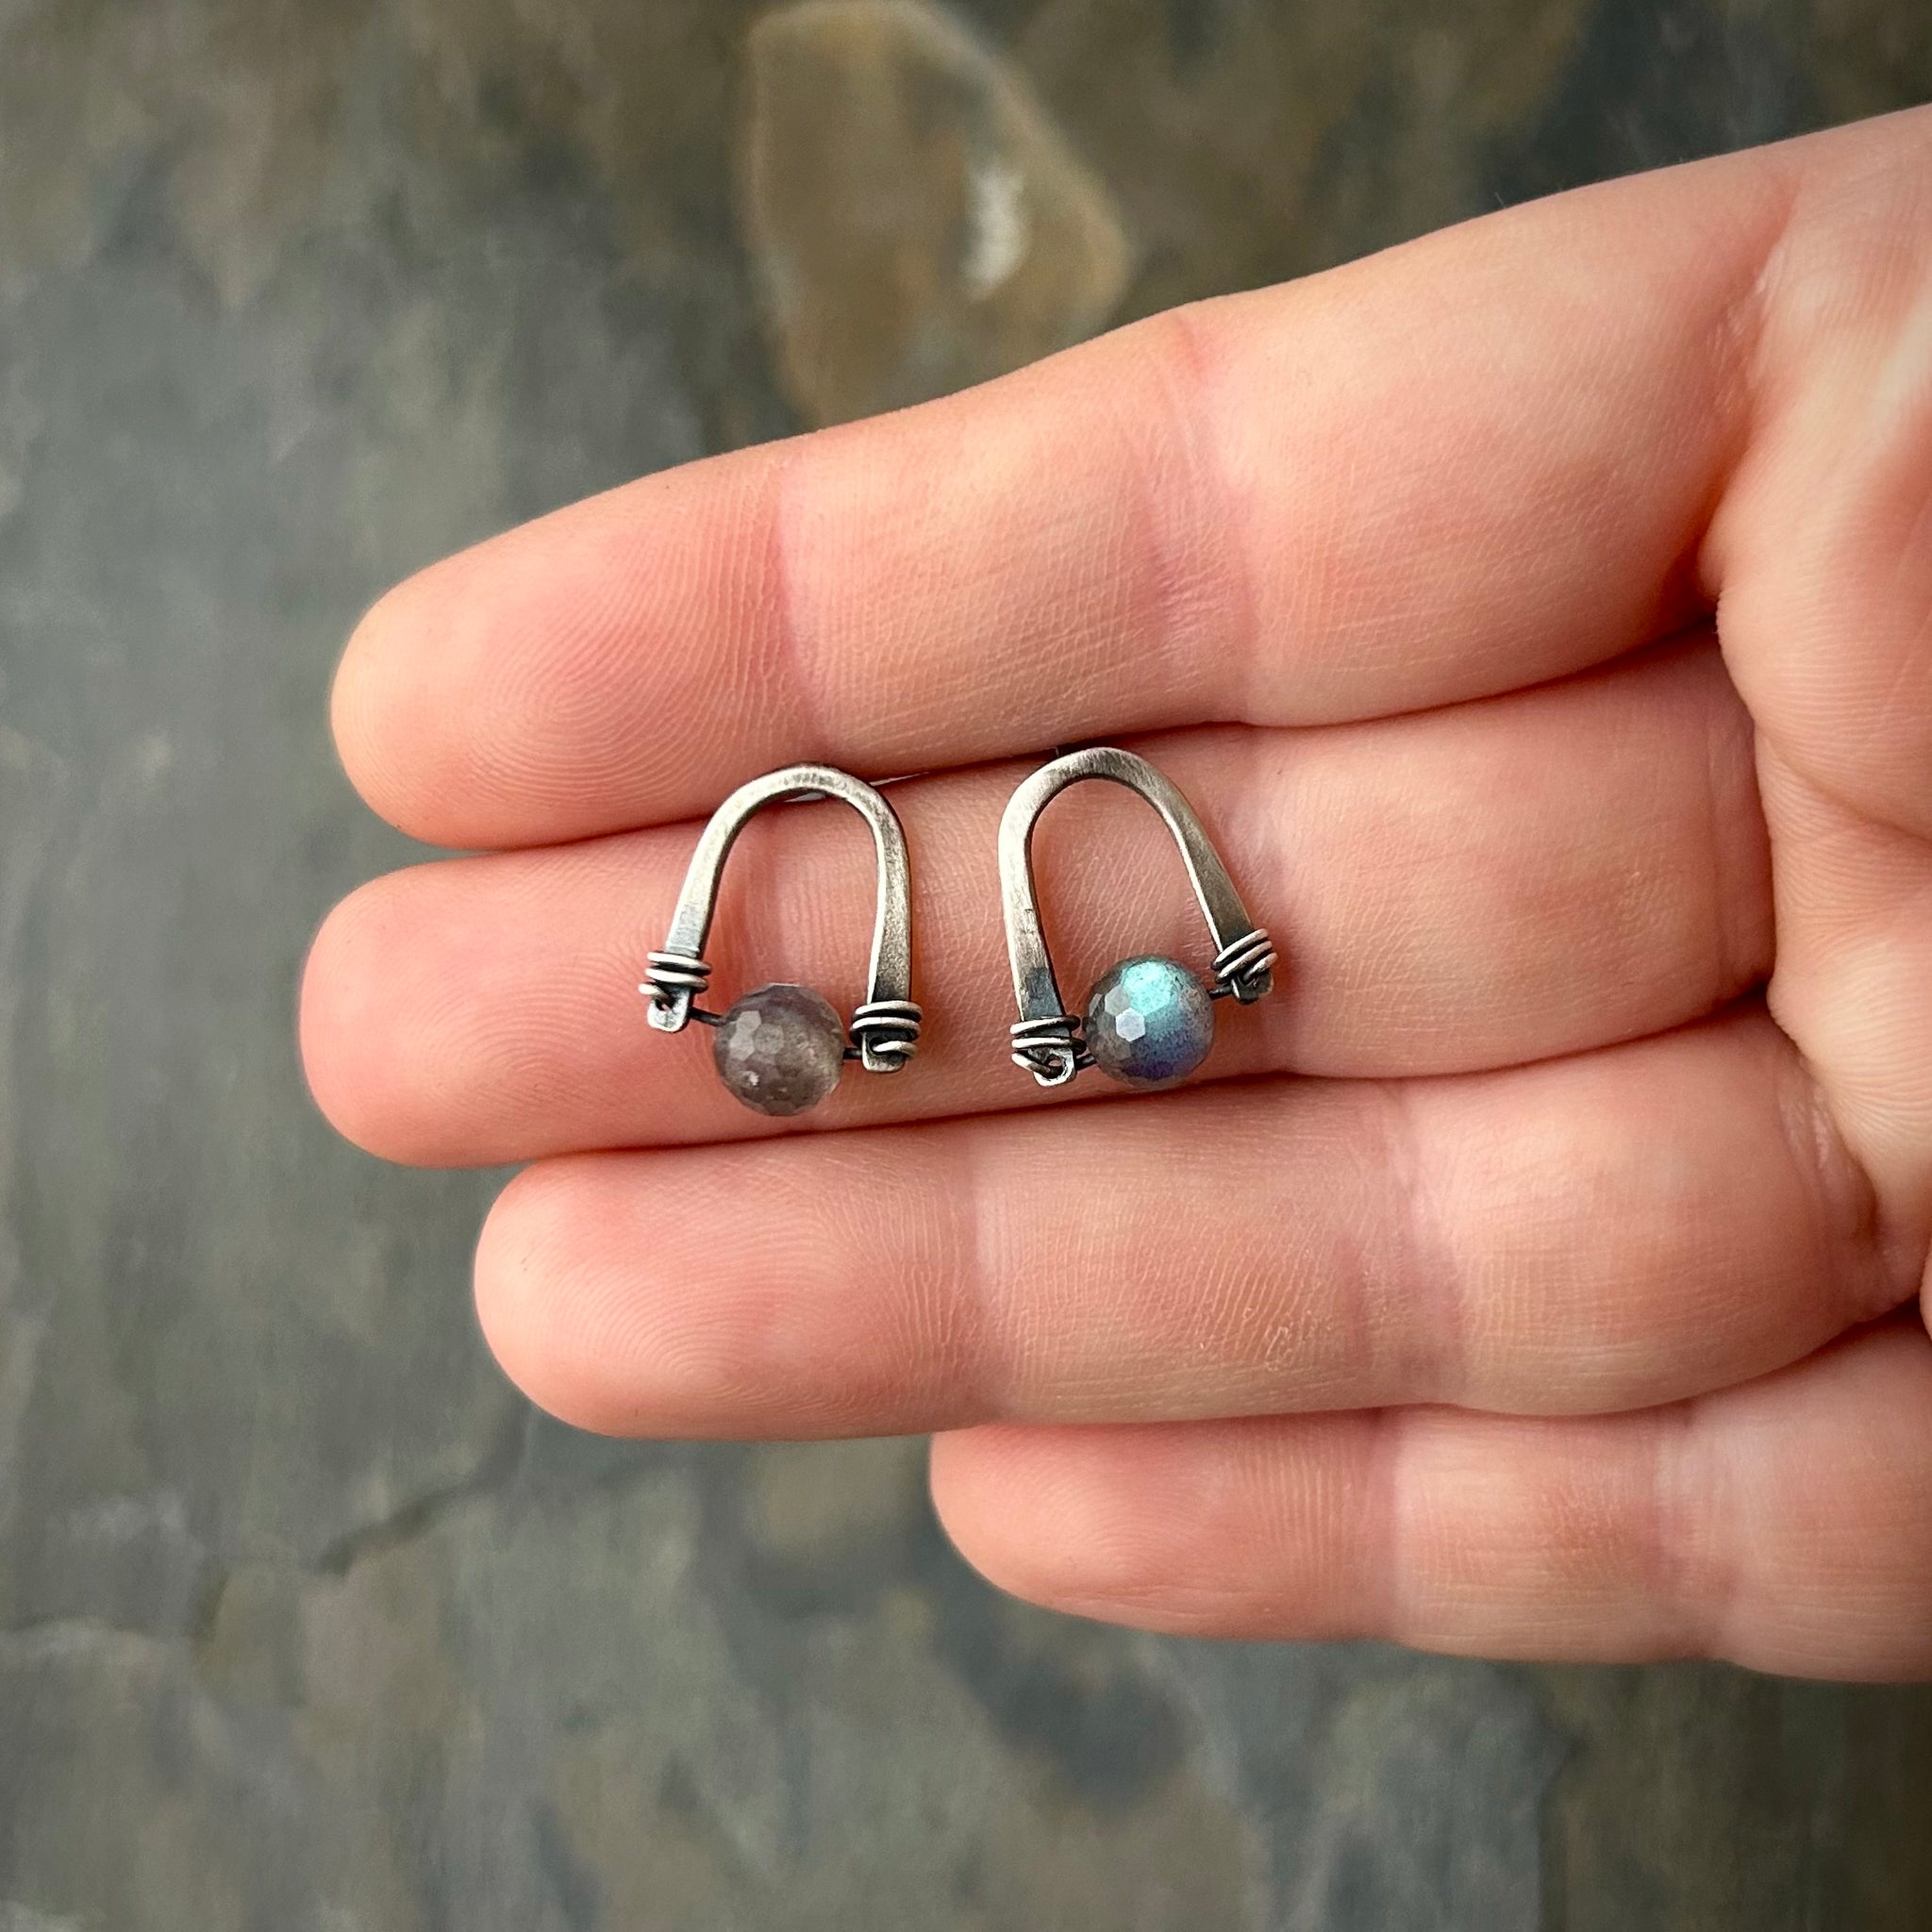 Arc Earrings with Labradorite